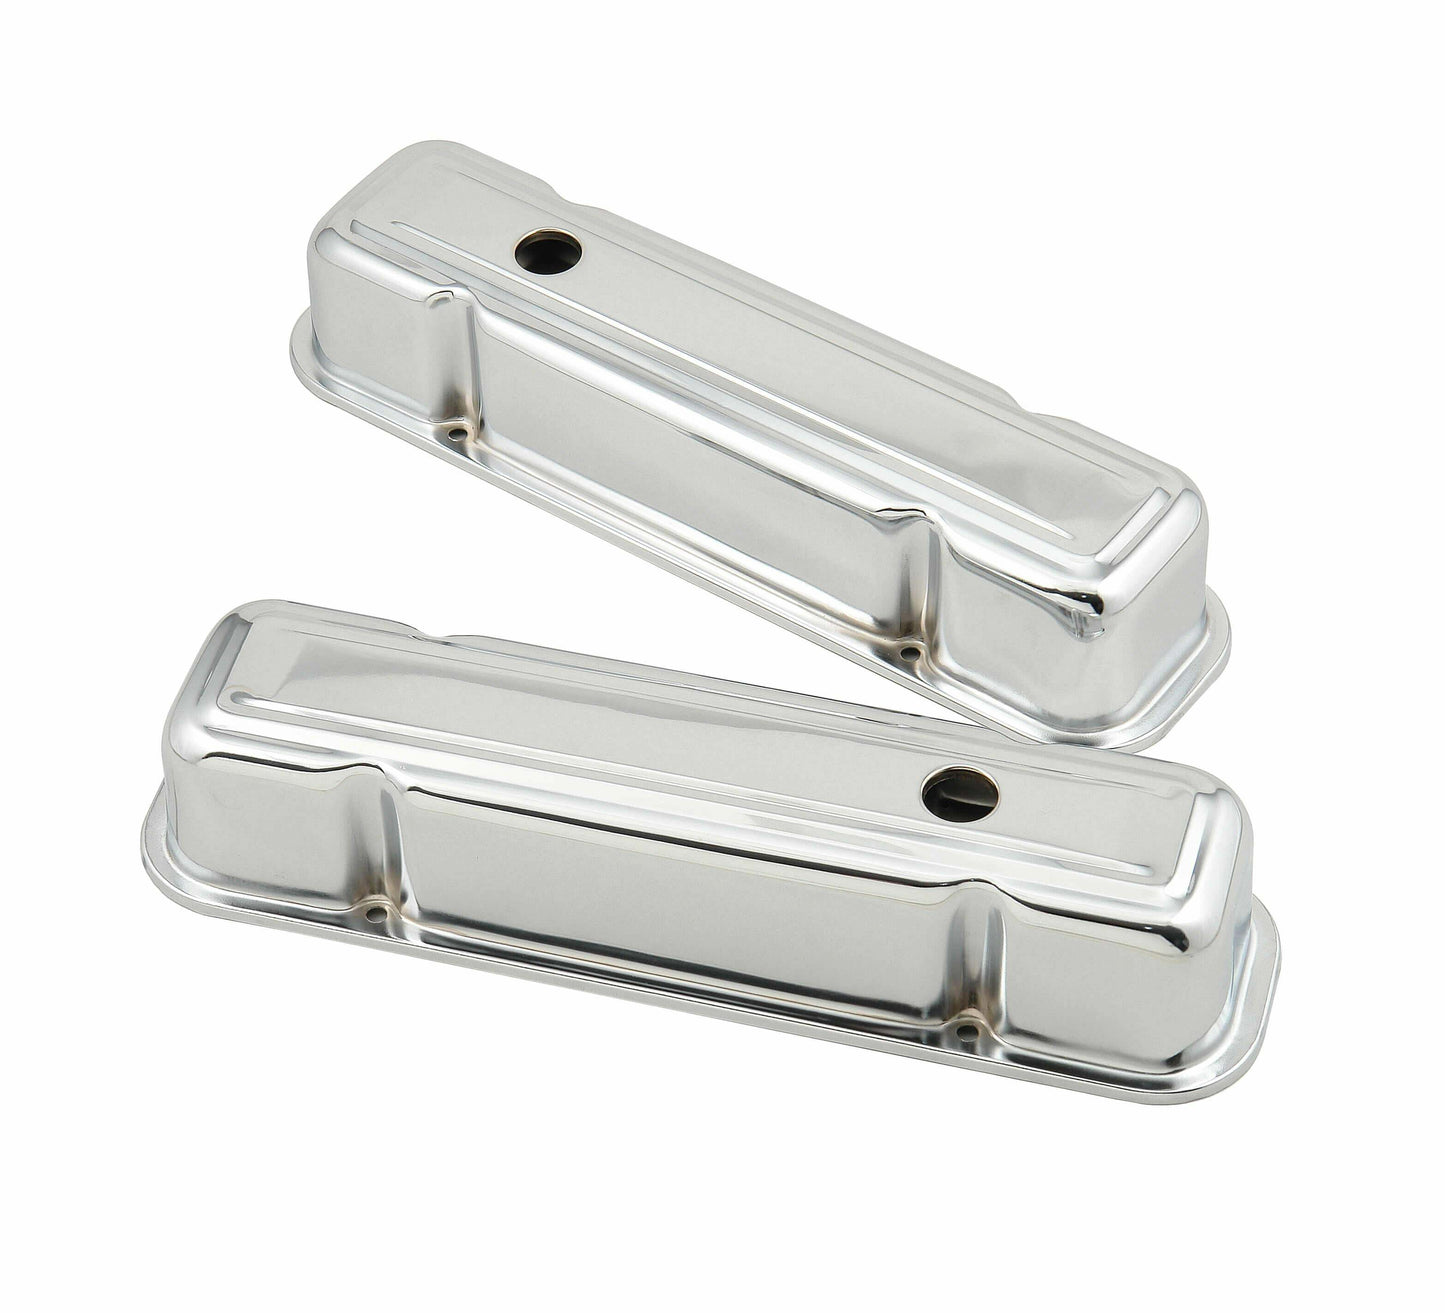 Mr. Gasket Chrome Tall-Style Valve Covers - 9805